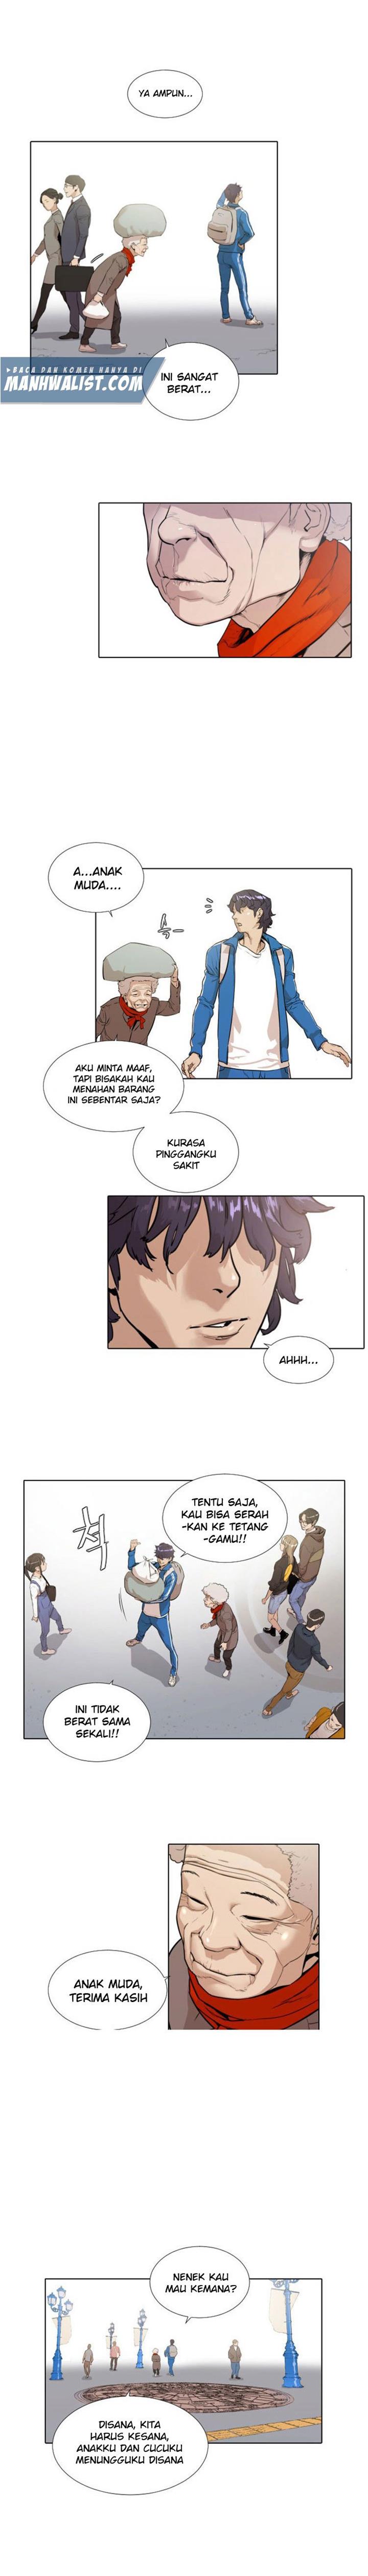 Spoiler Manhwa Find the Waves 3